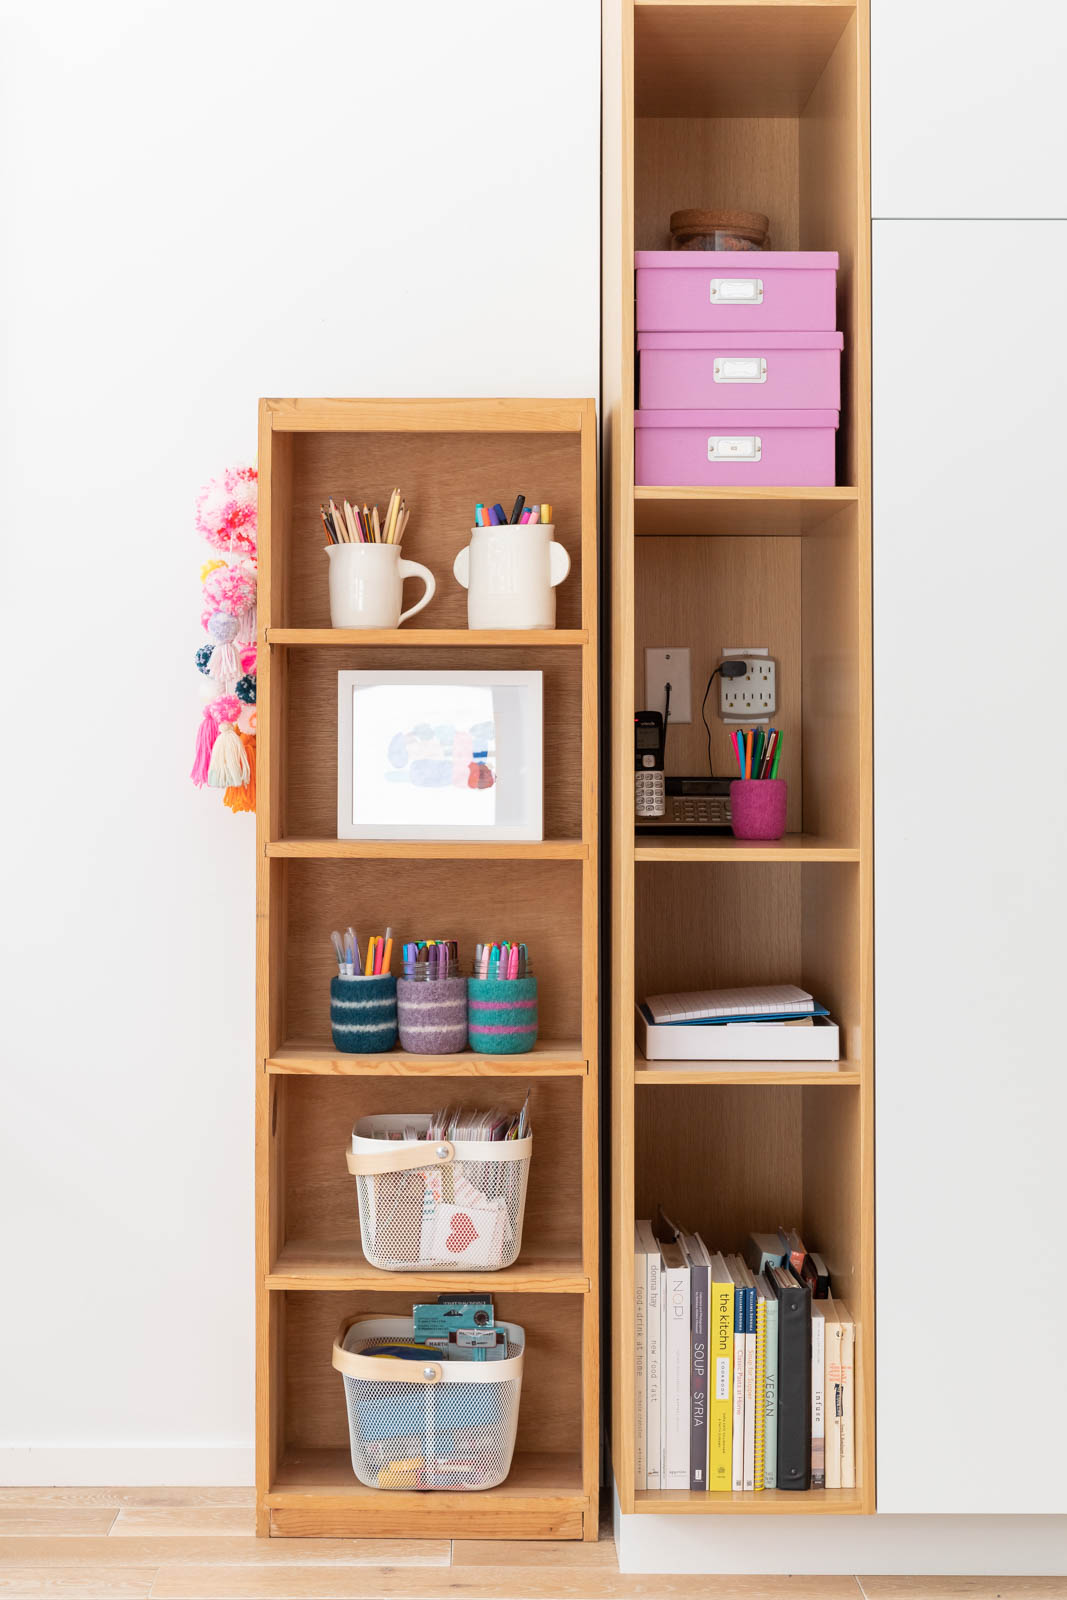 Two shelving units in the home office